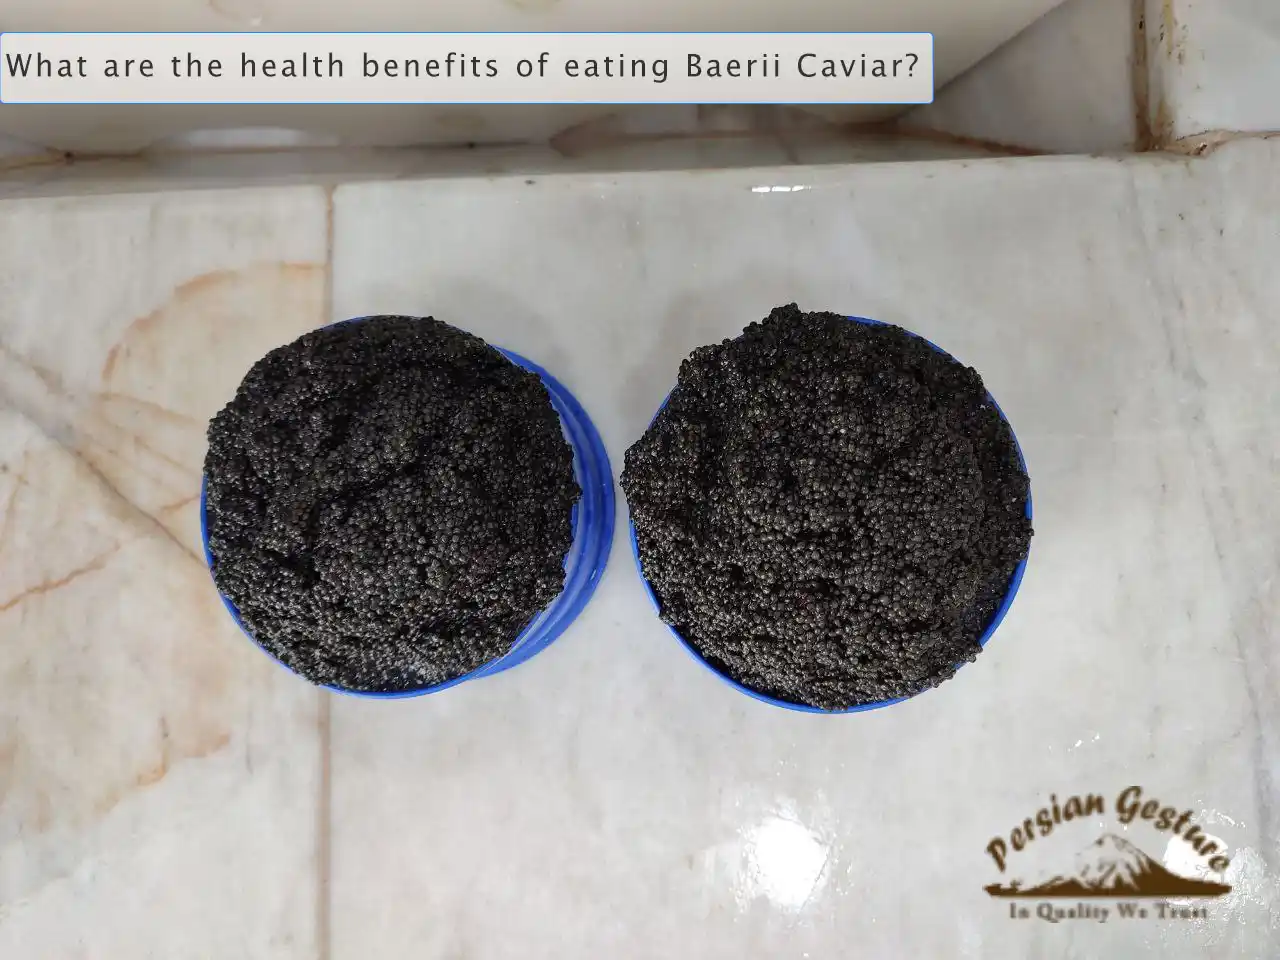 What are the health benefits of eating Baerii Caviar